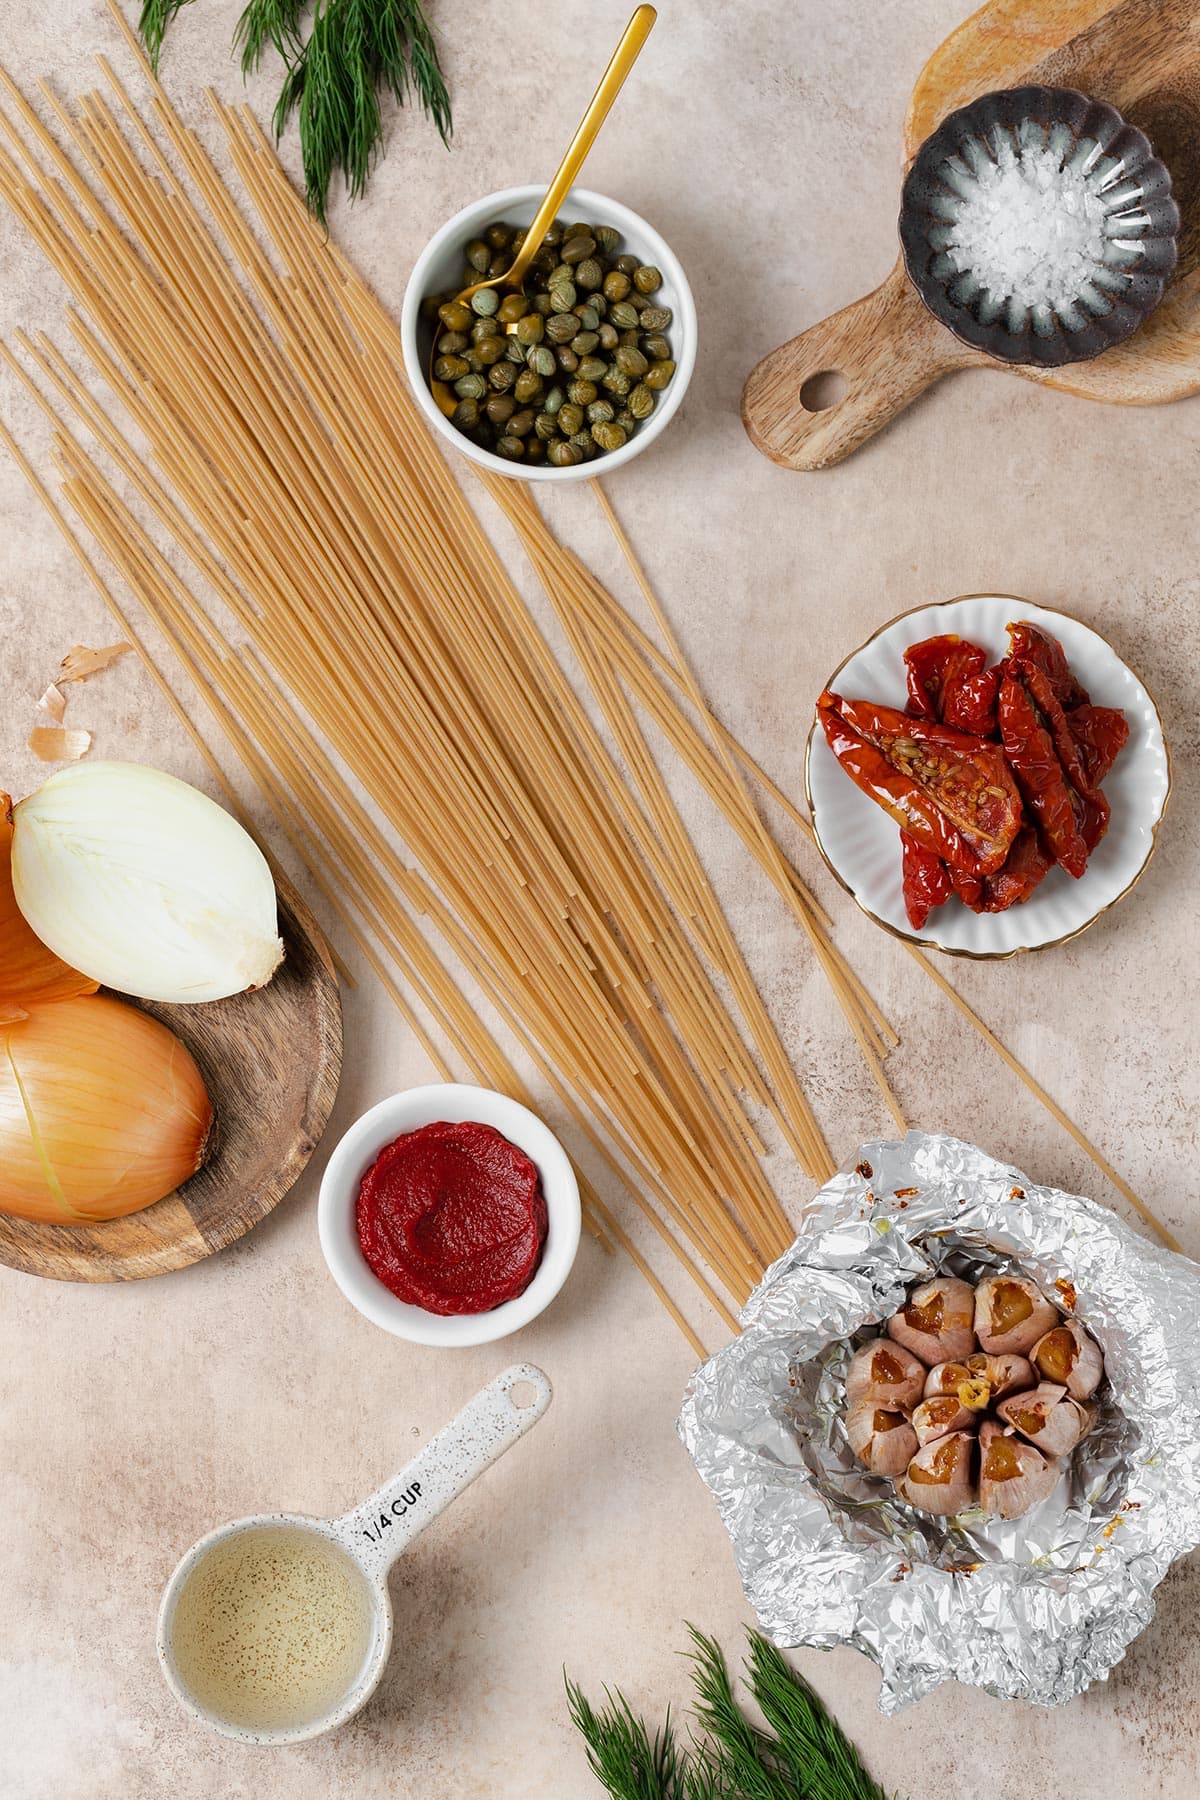 Ingredients for creamy sun-dried tomato pasta shown laid out on a beige background.